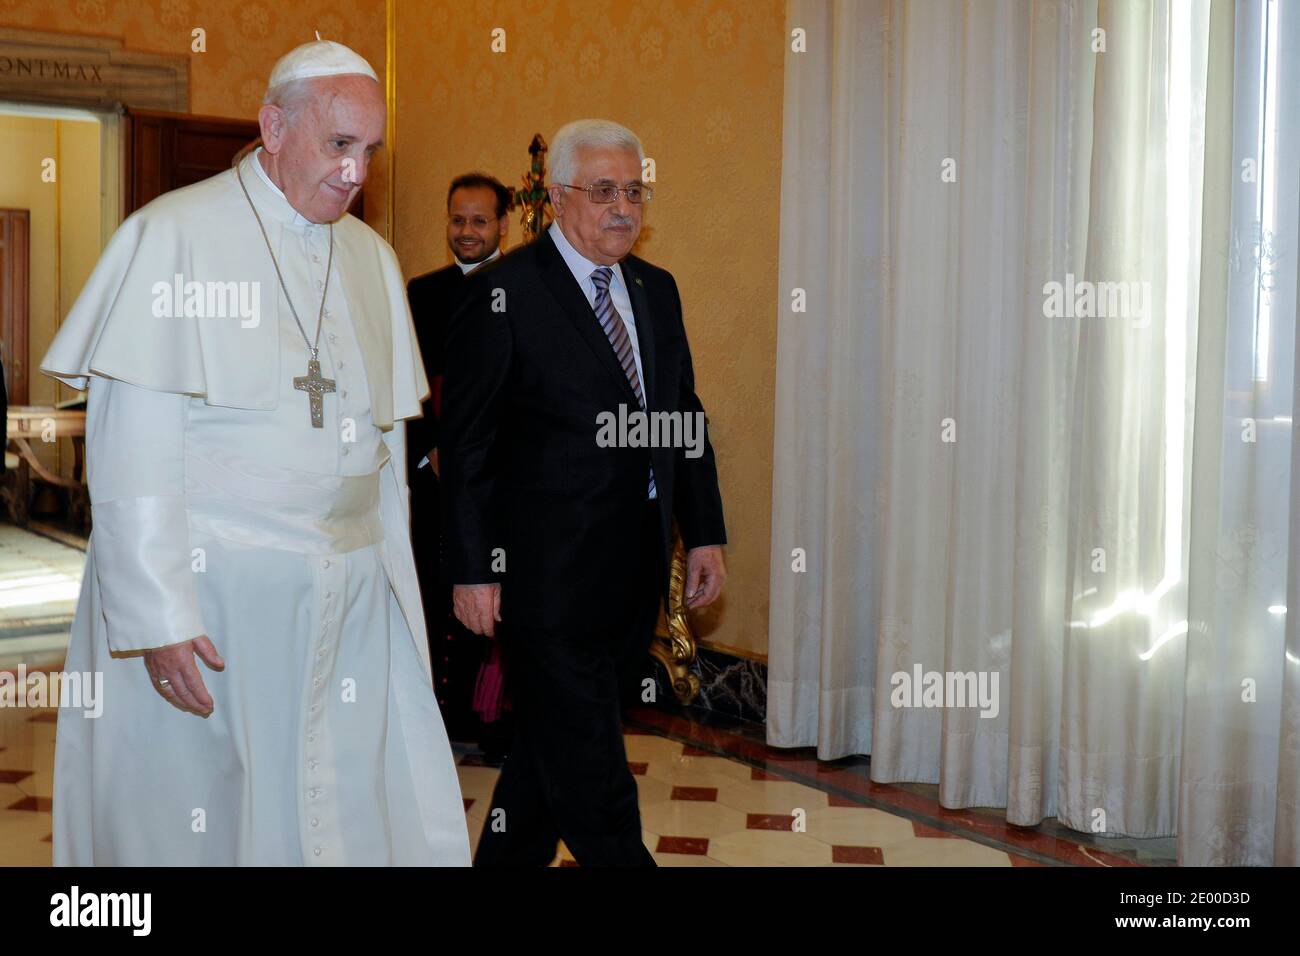 Pope Francis met Palestinian President Mahmud Abbas also known as Abu Mazen during a private audience at the Vatican on October 17, 2013. During the cordial discussions, reference was made to the situation in the Middle East and in particular to the reinstatement of negotiations between Israelis and Palestinians. Mahmud Abbas invited Pope Francis to visit the Holy Land. Photo by ABACAPRESS.COM Stock Photo